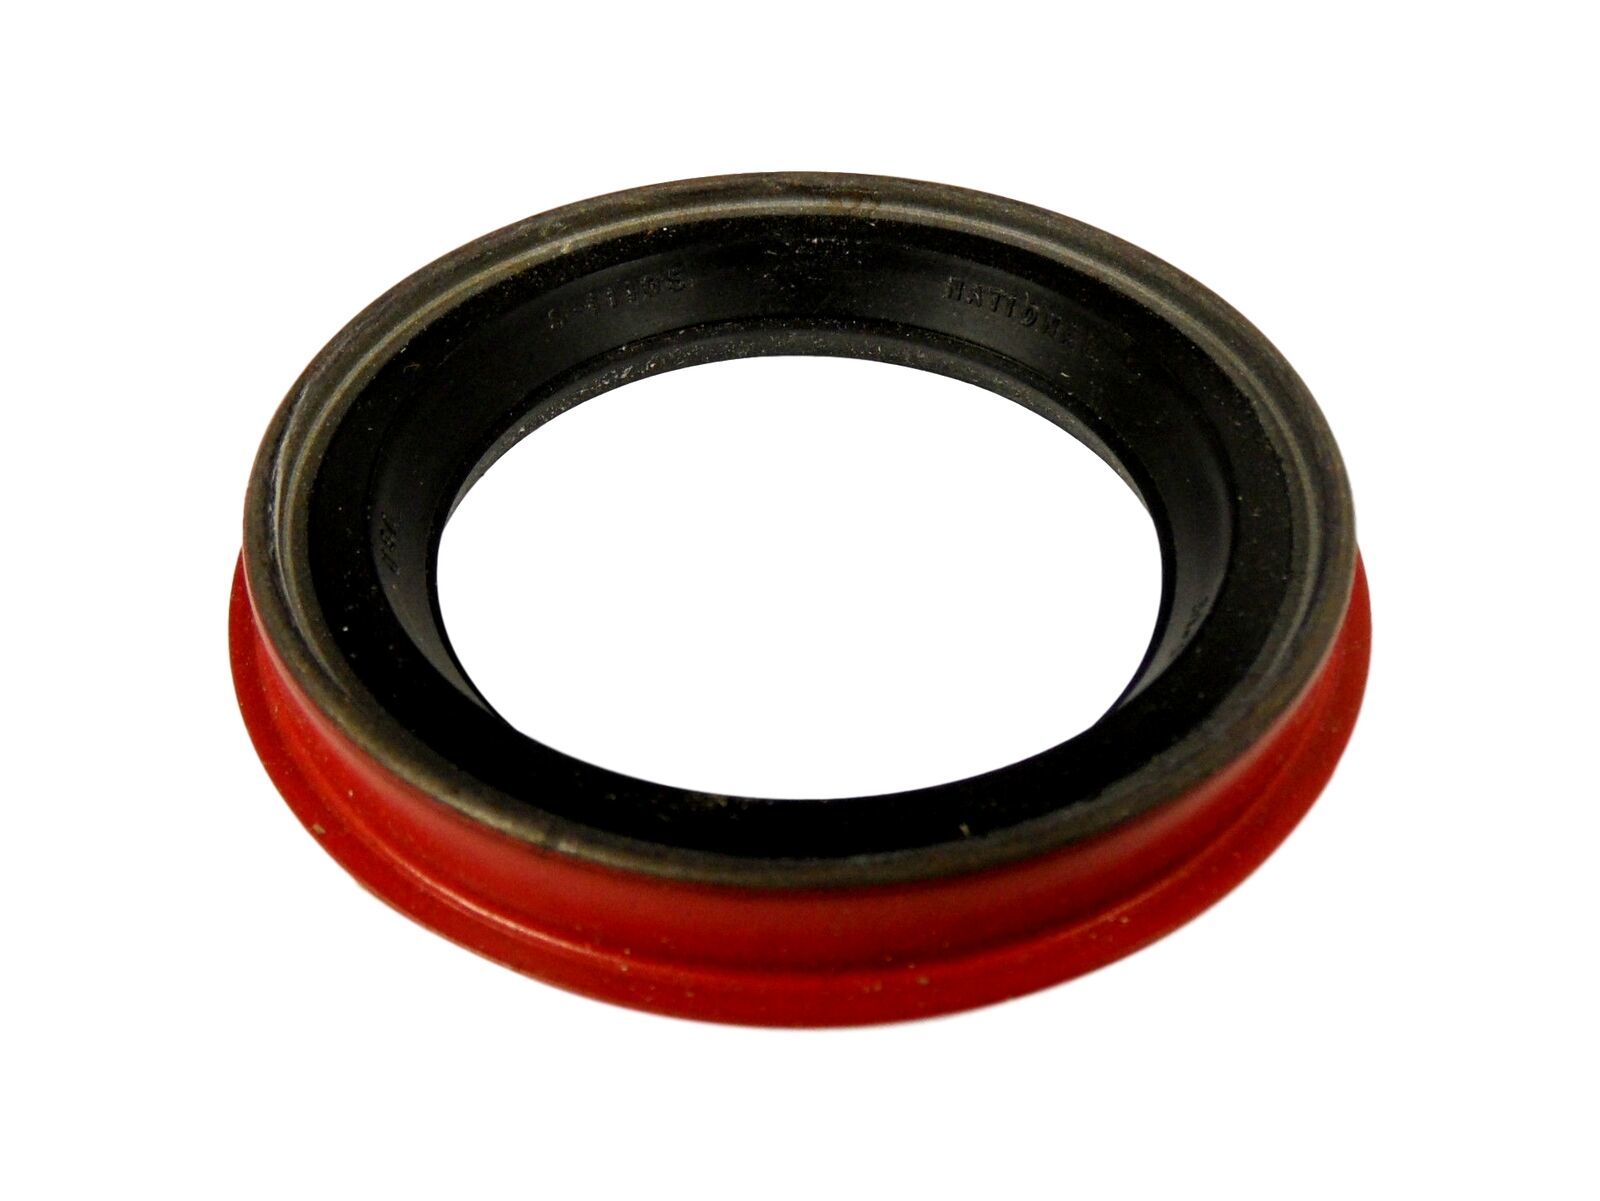 Primary image for Federal Mogul National 8312 Wheel Seal 2.136x2.910x.326